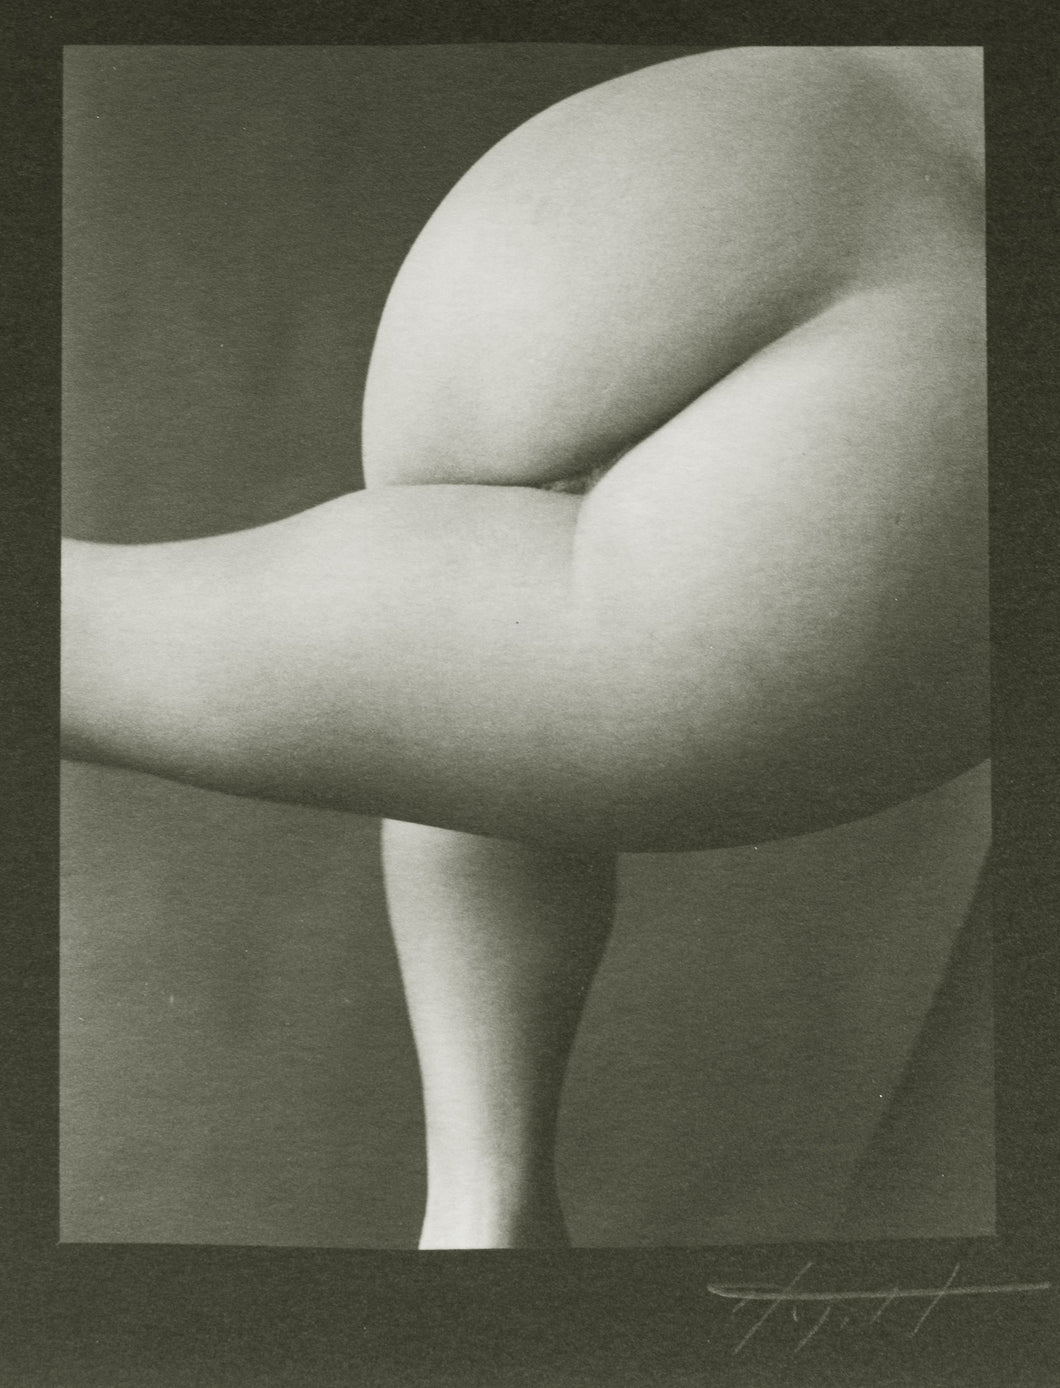 Nude #61, Platinum Print, An Abstract Photograph of Female Nude 1990s by Carl Hyatt